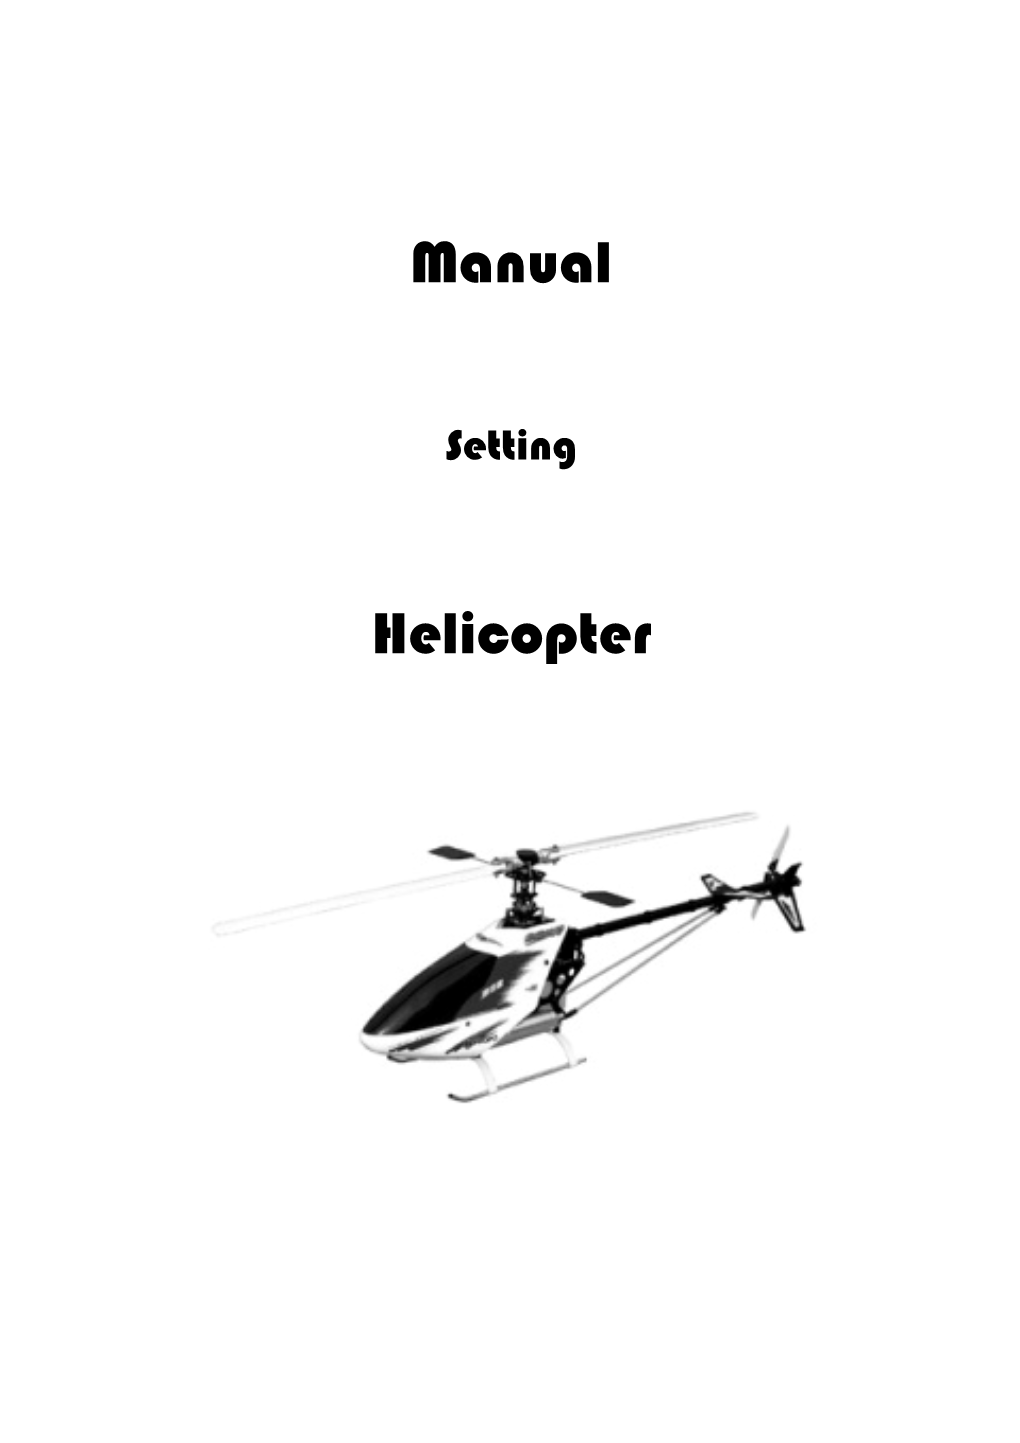 Manual Helicopter